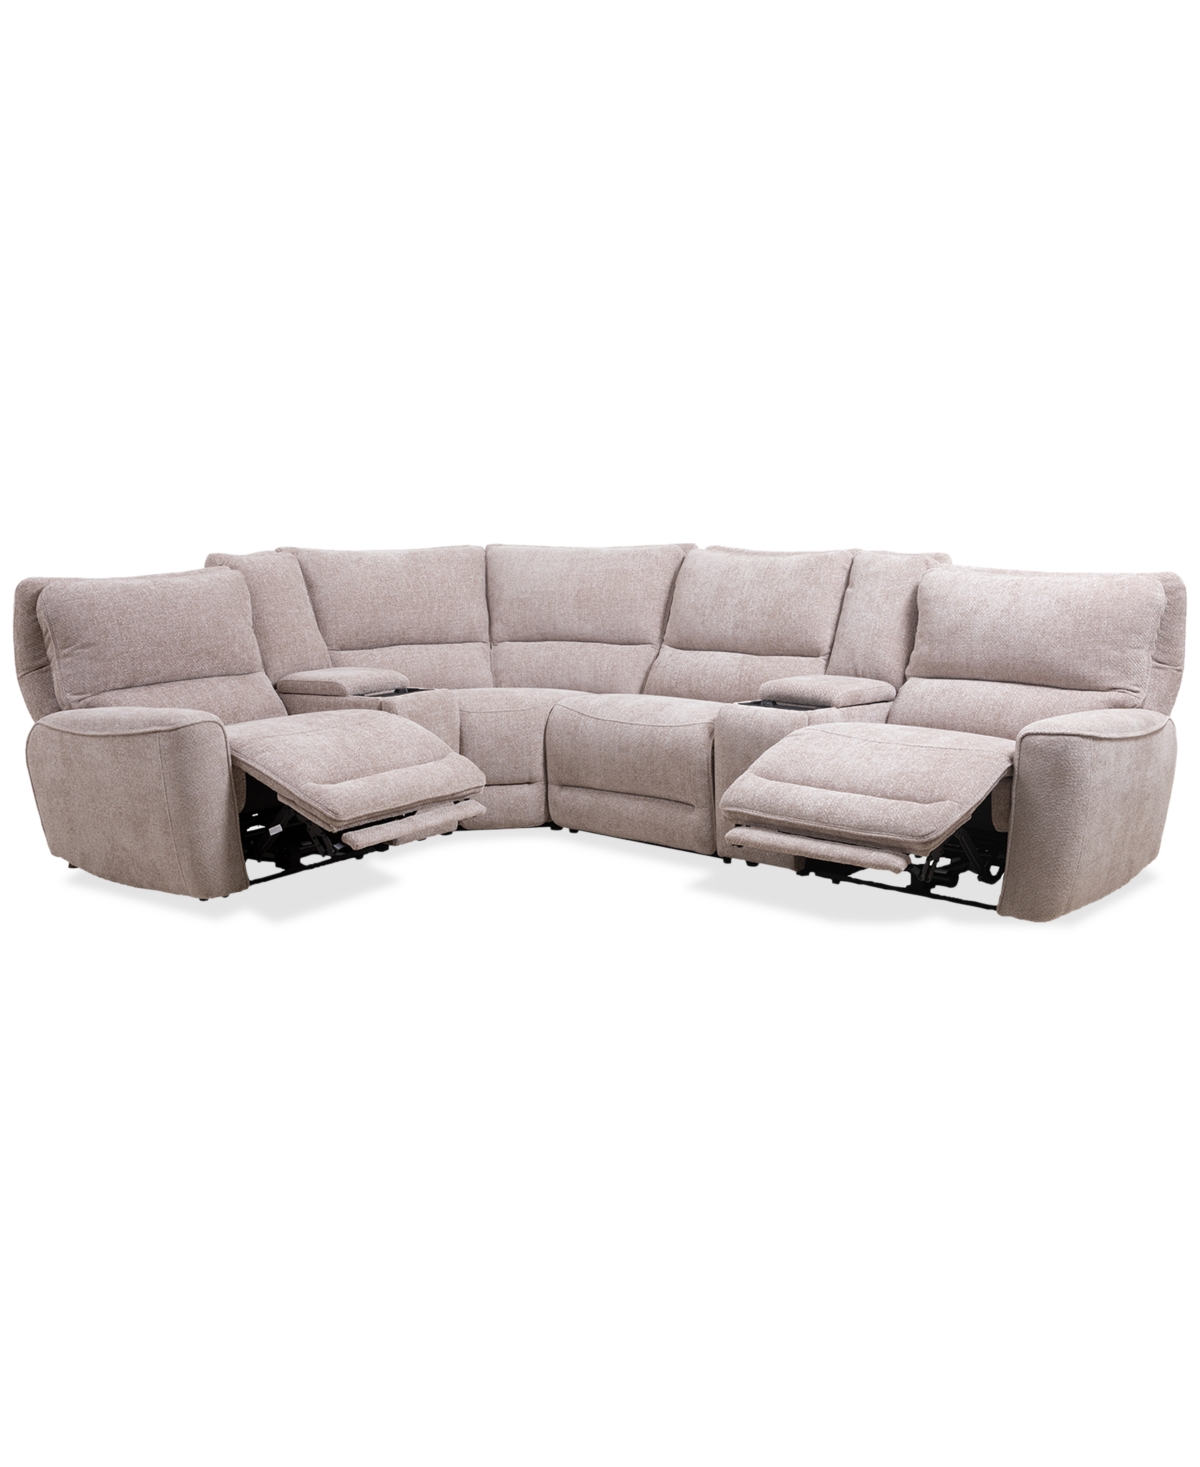 Macy's Deklyn 129" 6-pc. Zero Gravity Fabric Sectional With 2 Power Recliners & 2 Consoles, Created For Mac In Cobblestone